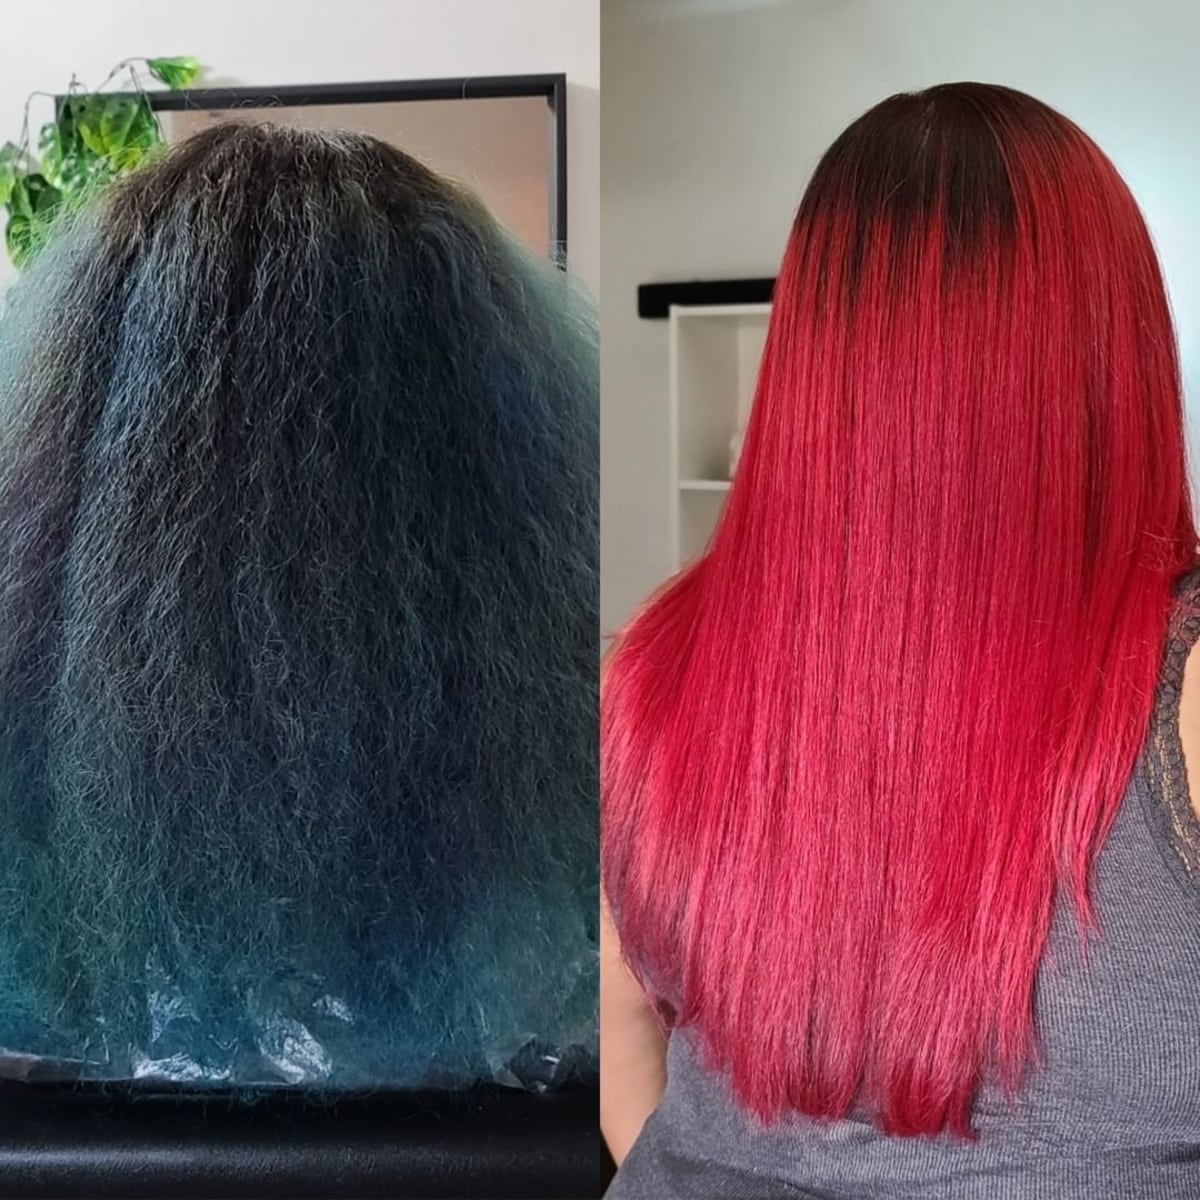 Bright red before and after hair transformation